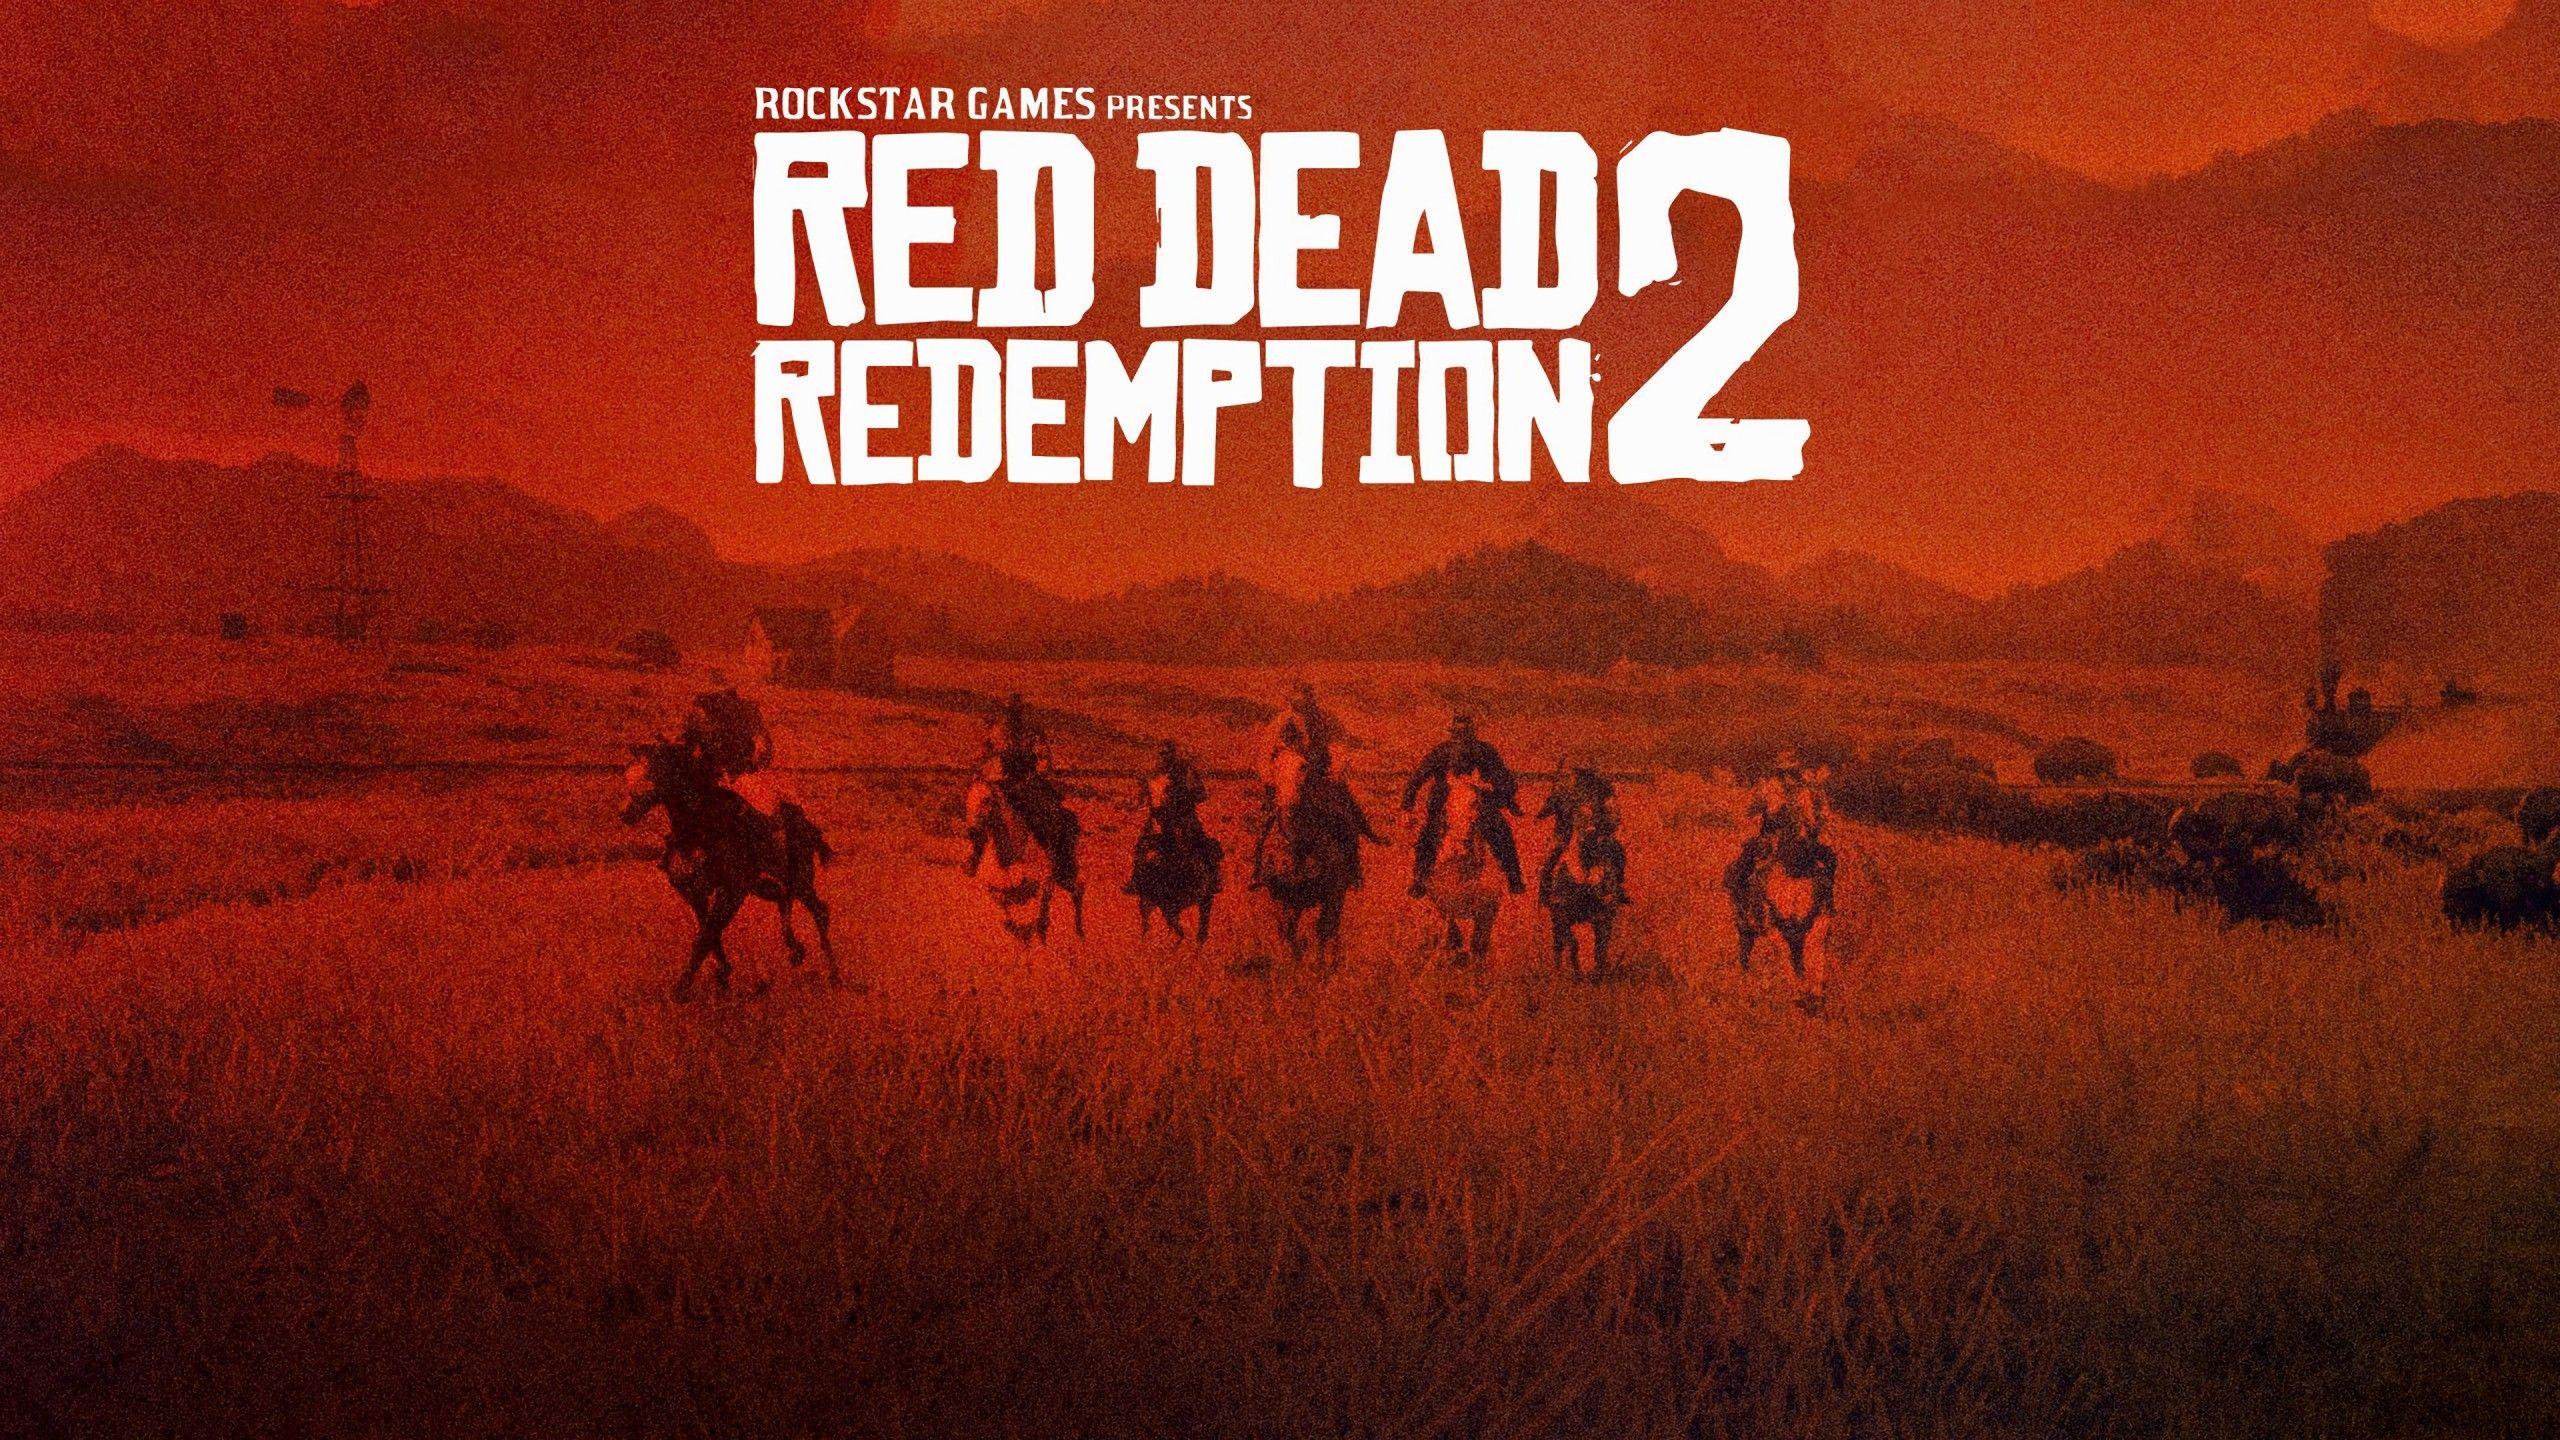 red dead redemption 2 pc free download full game